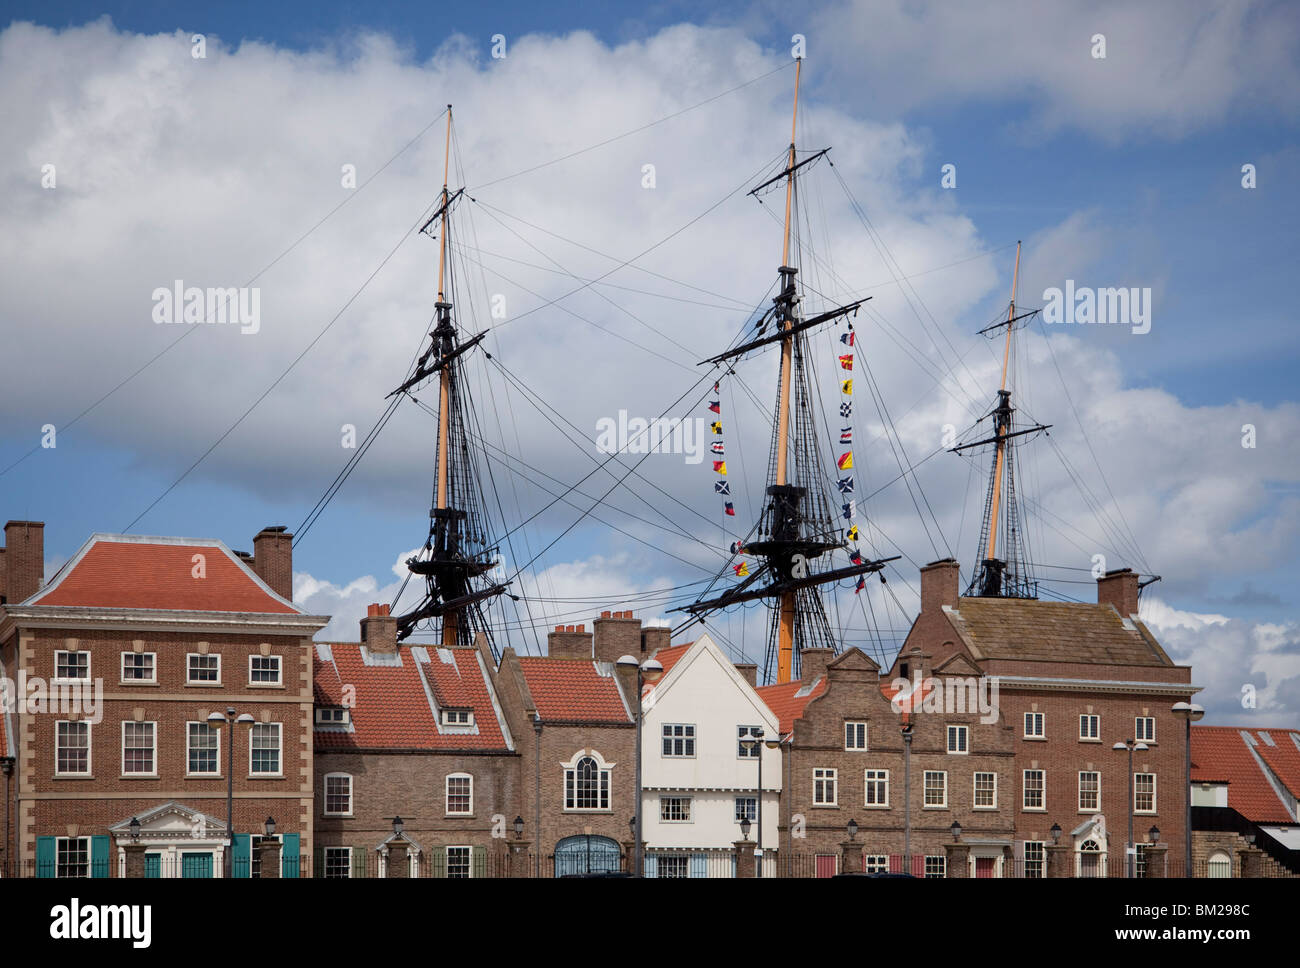 Masts and rigging of HMS Trincomalee,Hartlepool's Maritime Experience, Hartlepool, Cleveland, UK Stock Photo